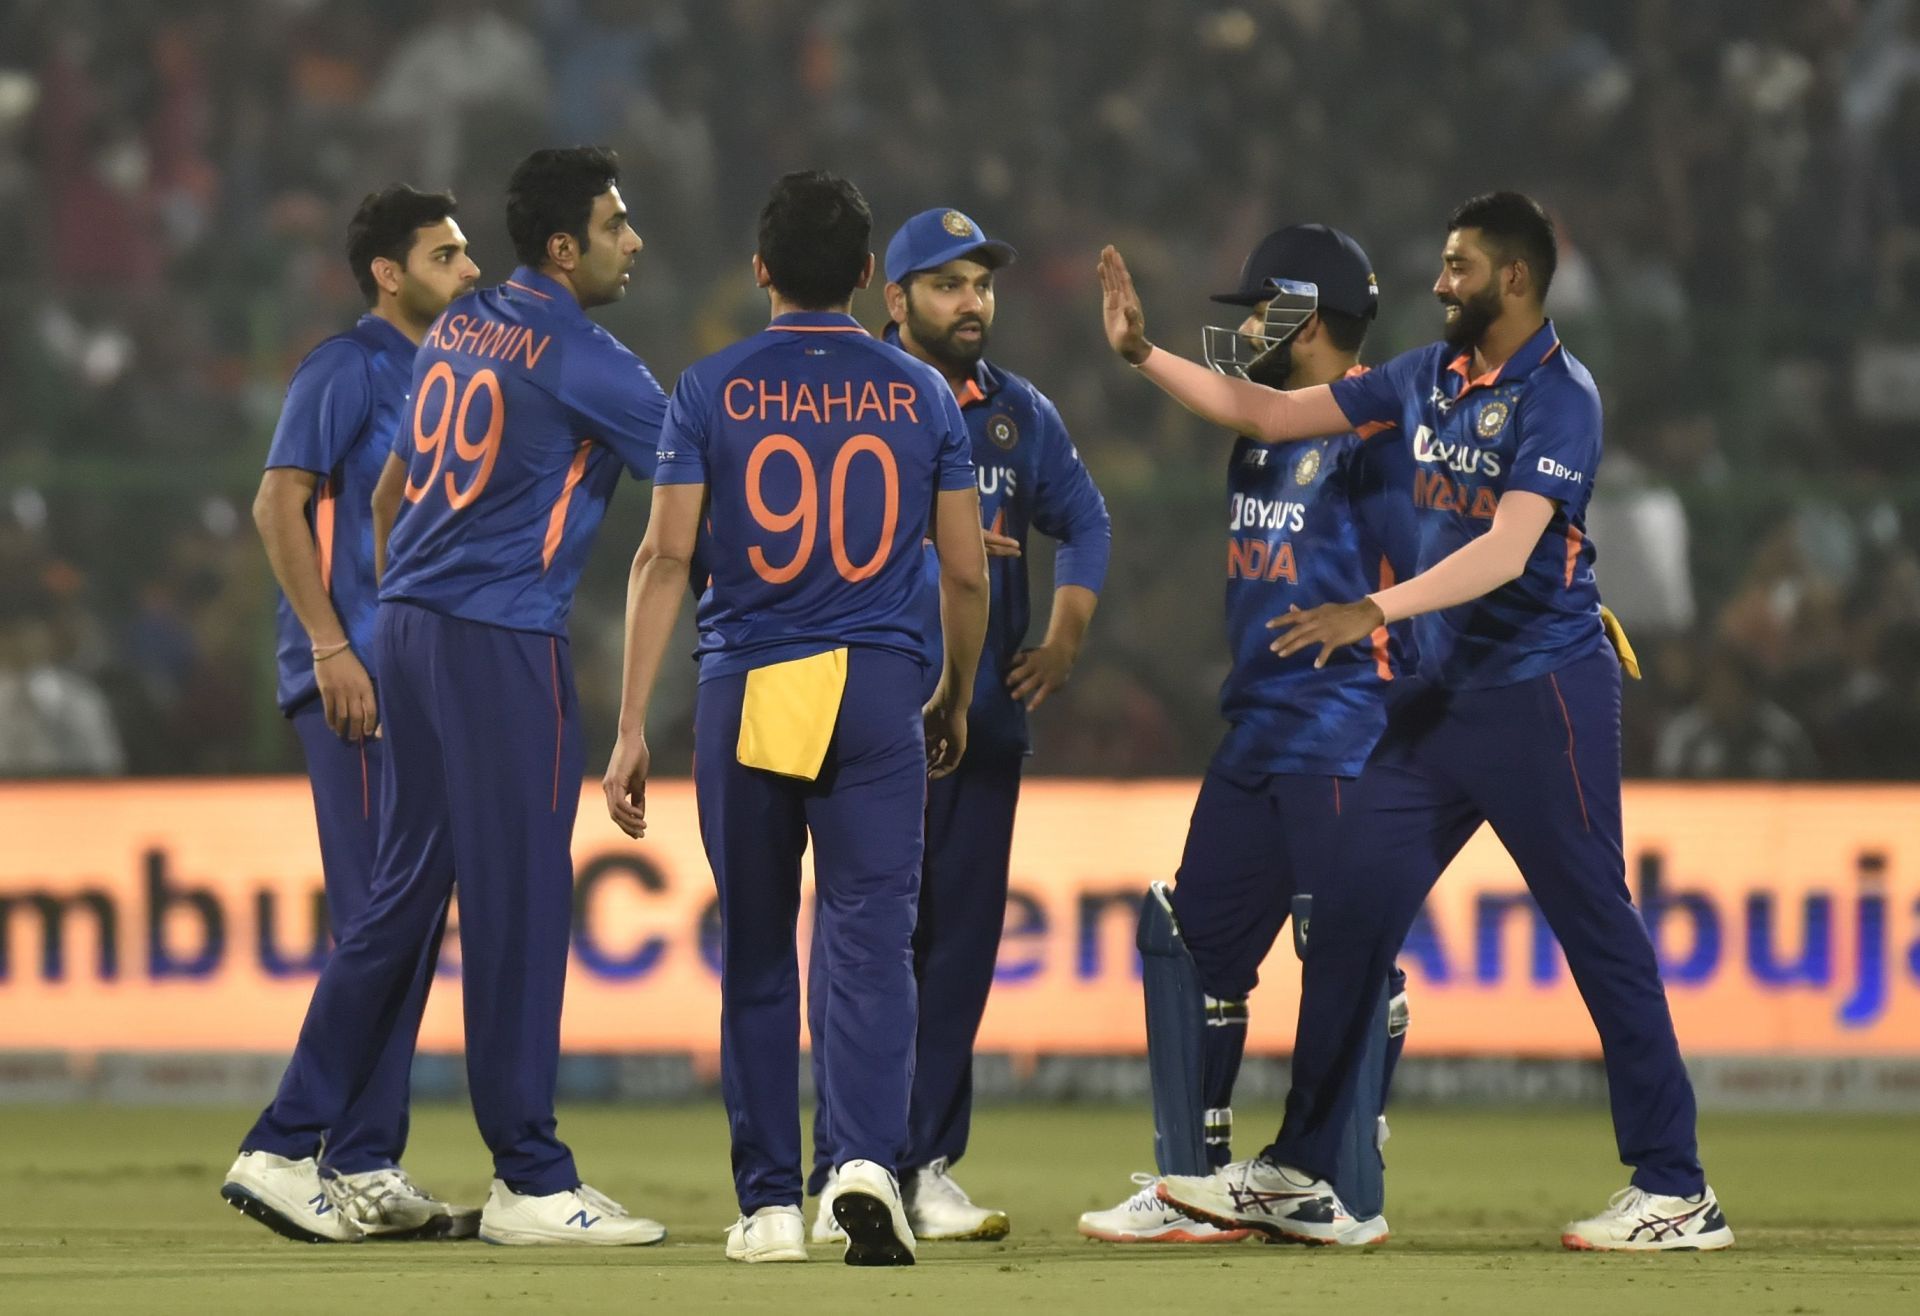 Team India begin the T20I series against New Zealand on a promising note